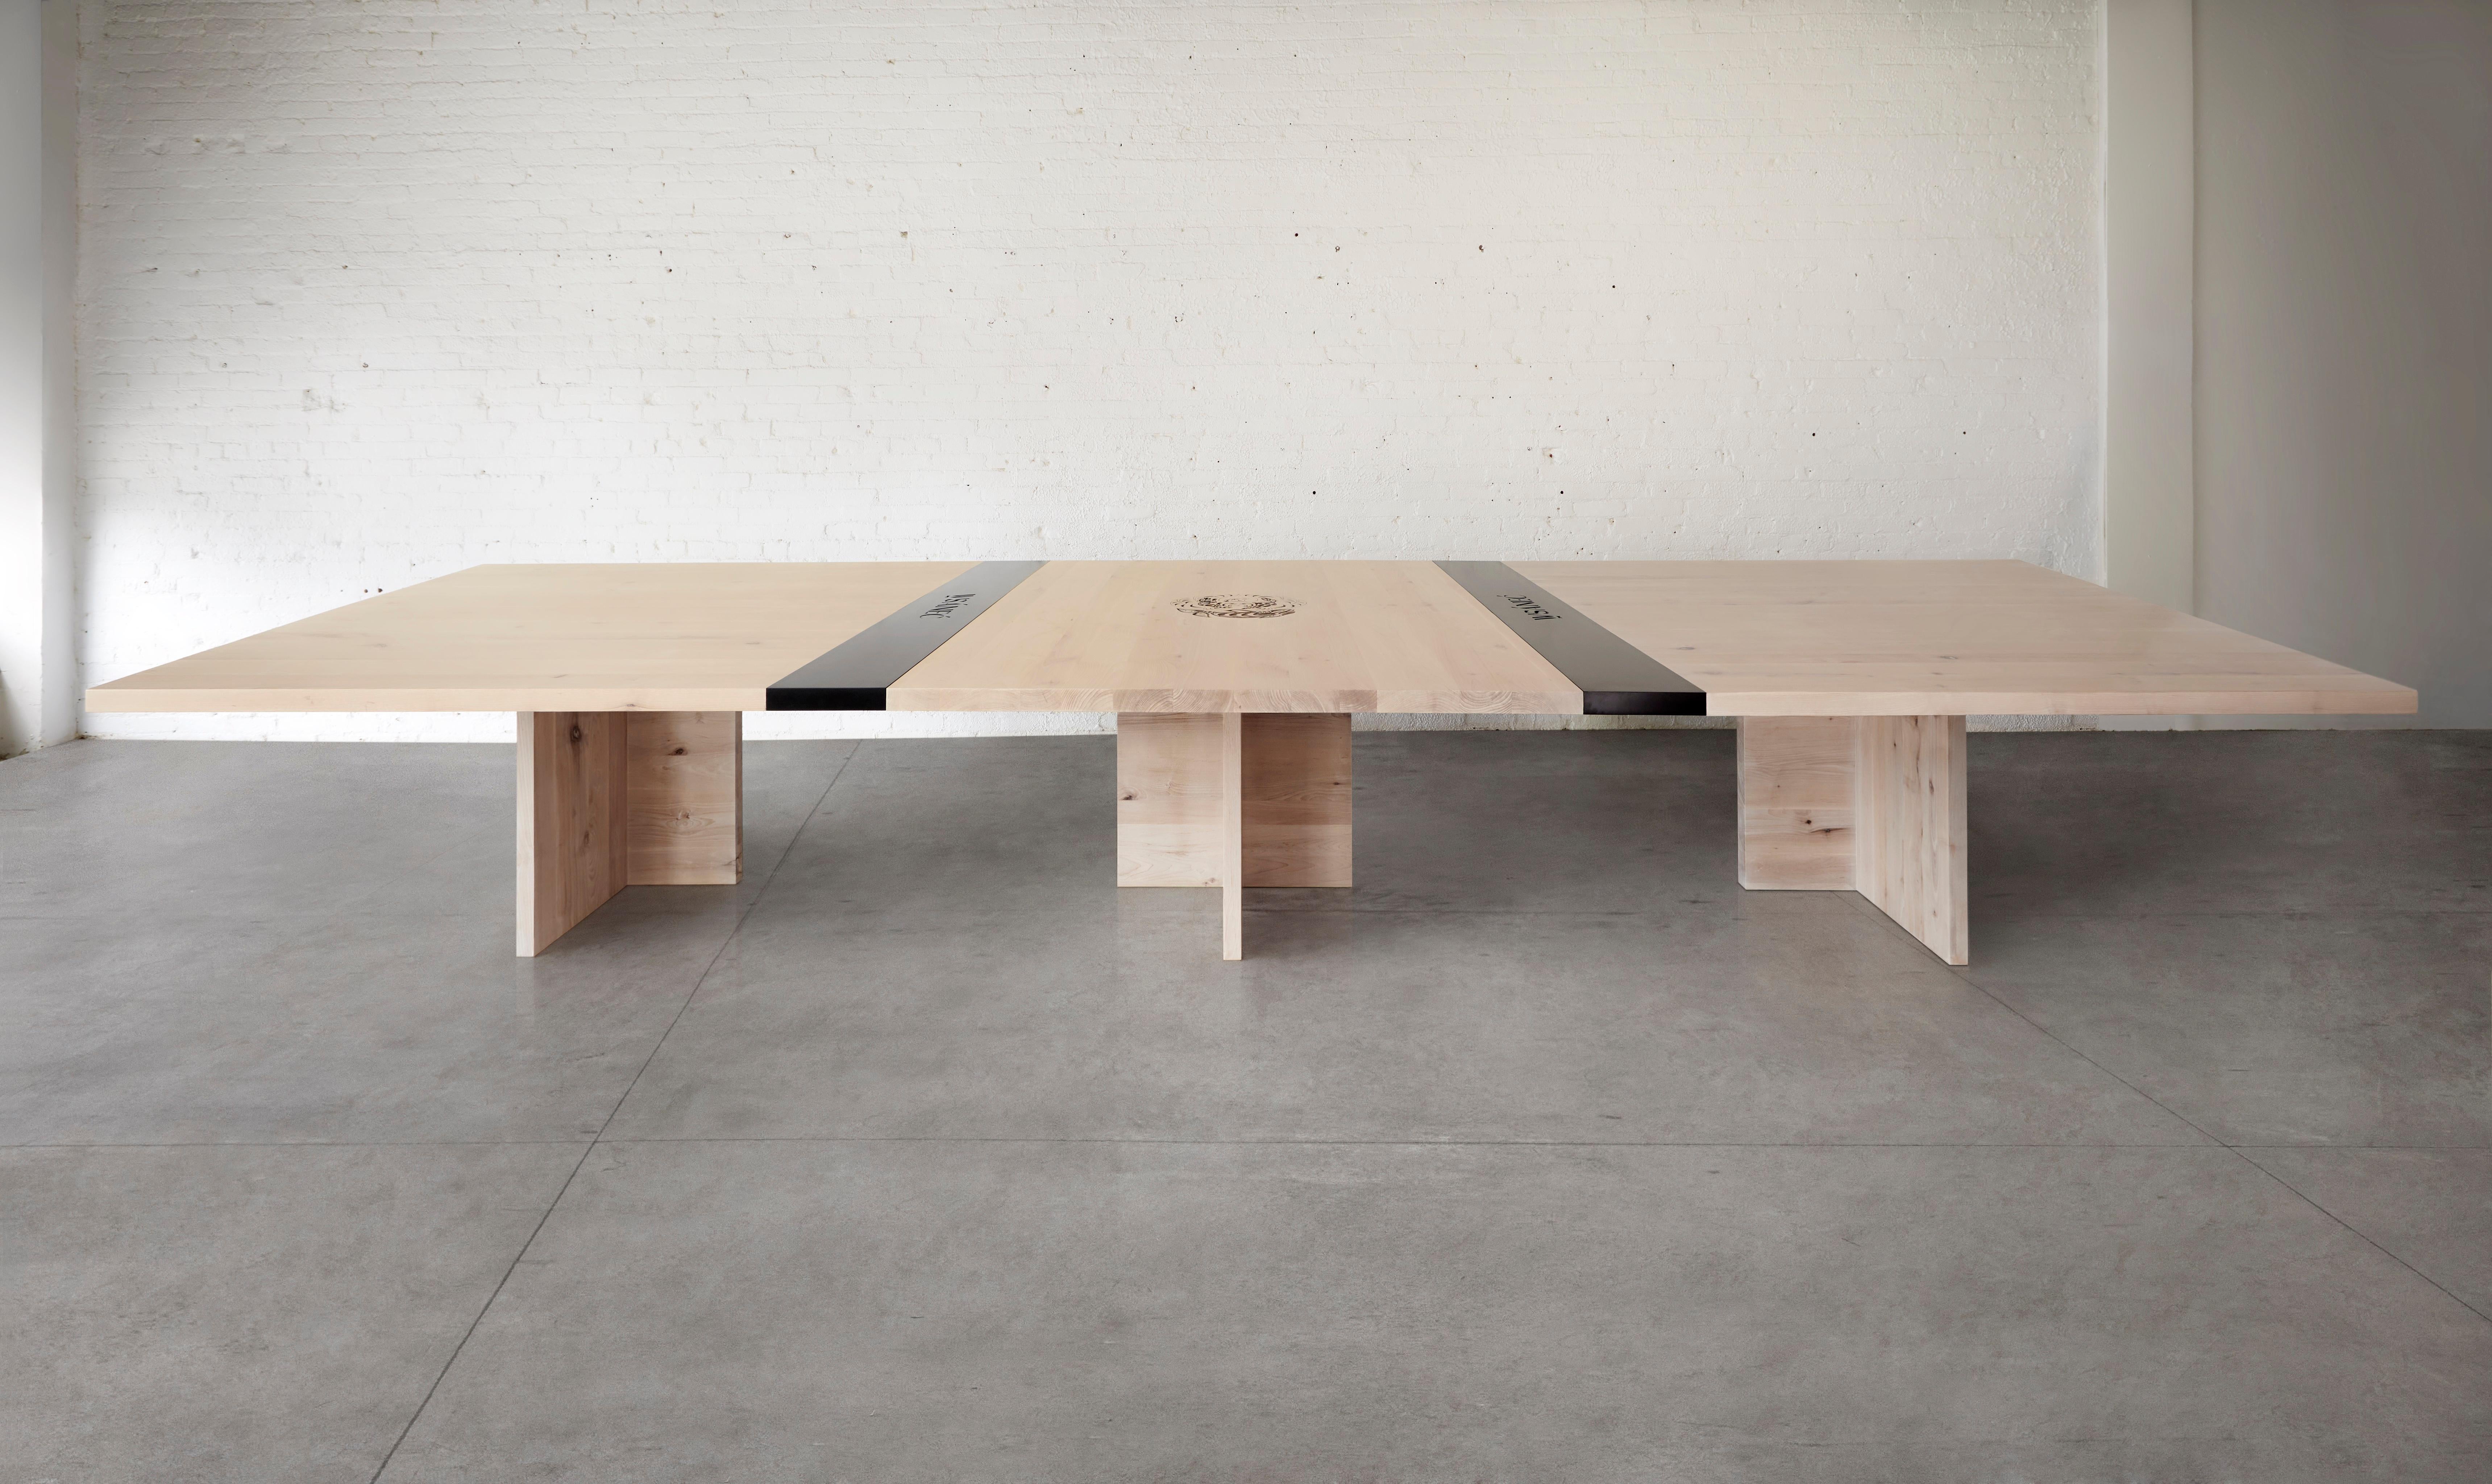 Crafted from solid Vancouver Island Alder, this table exudes strength and luxury, setting the stage for productive meetings and fruitful discussions.

Customizable adaptations for AV equipment ensure seamless integration of technology, enhancing